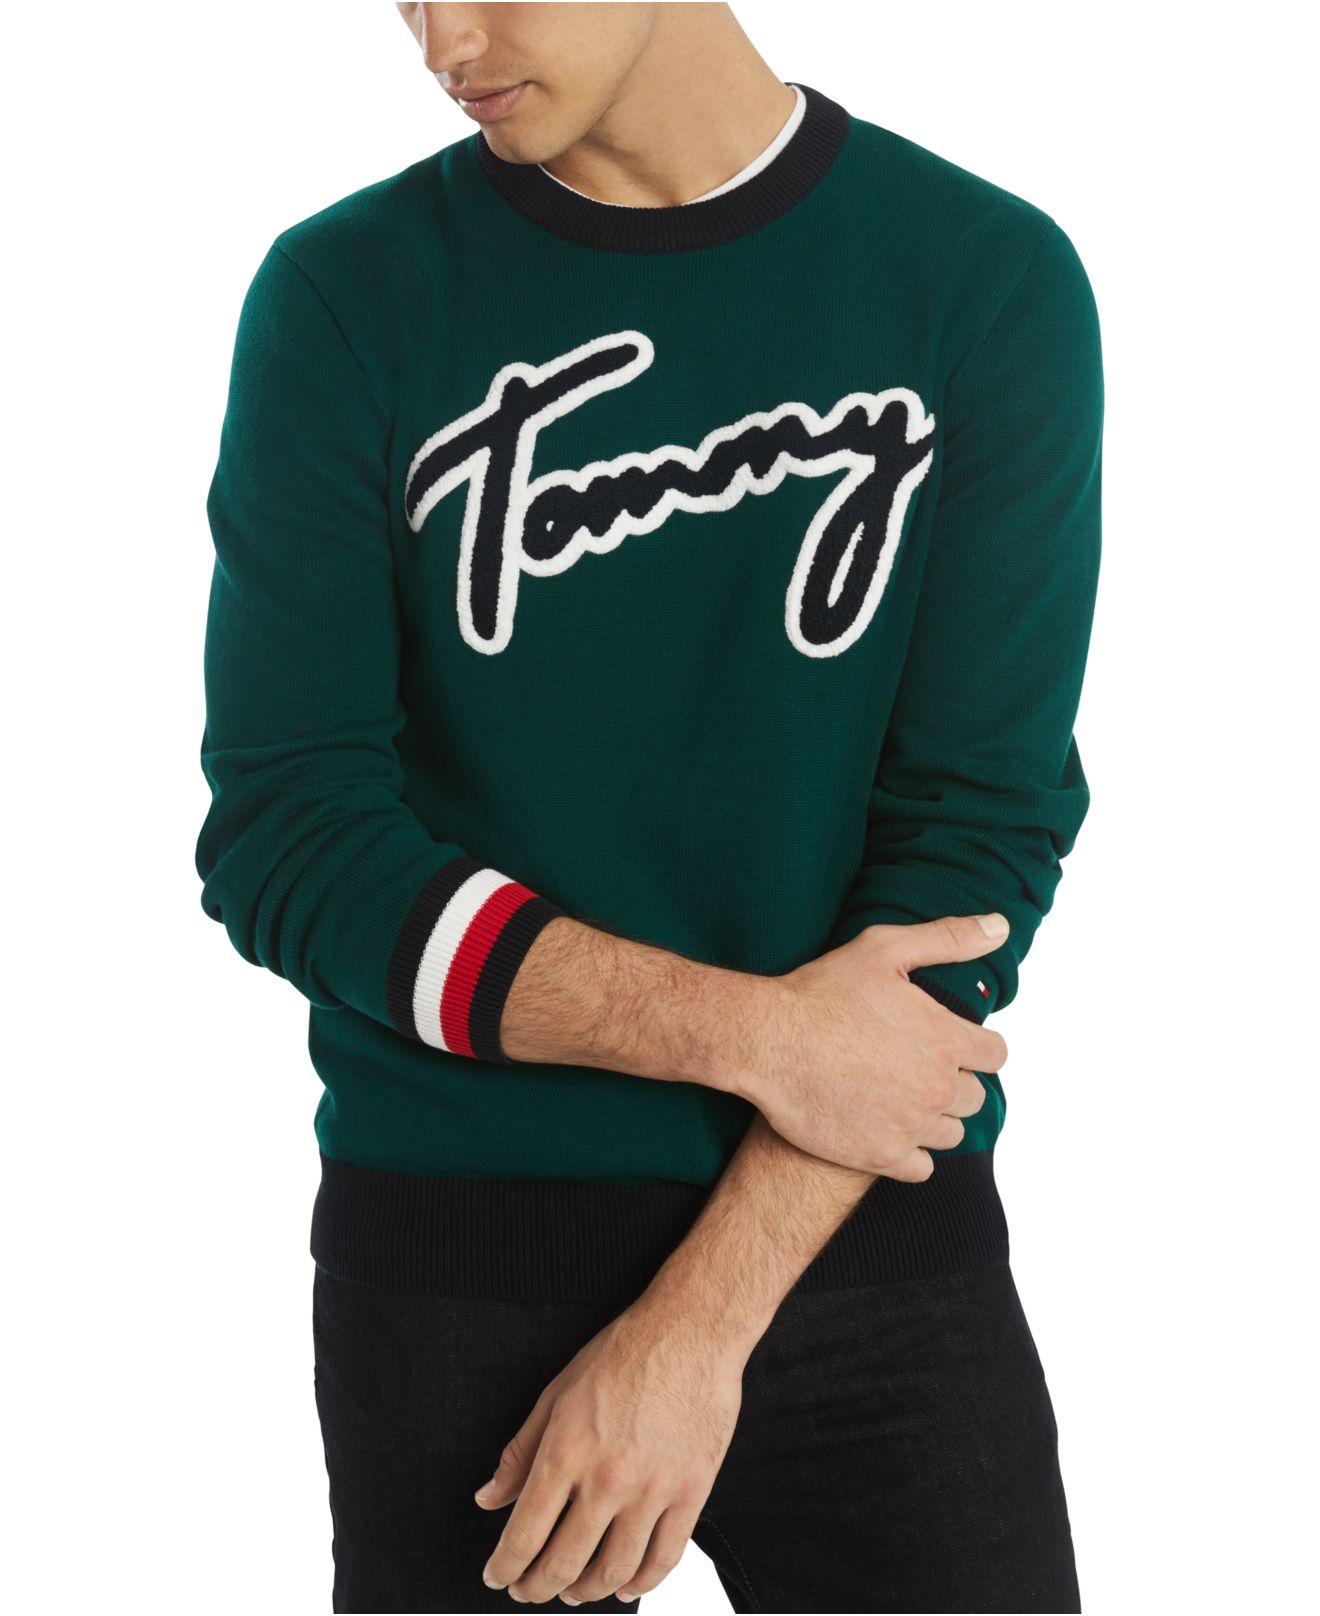 Tommy Hilfiger Green Sweater Clearance, SAVE 59%.